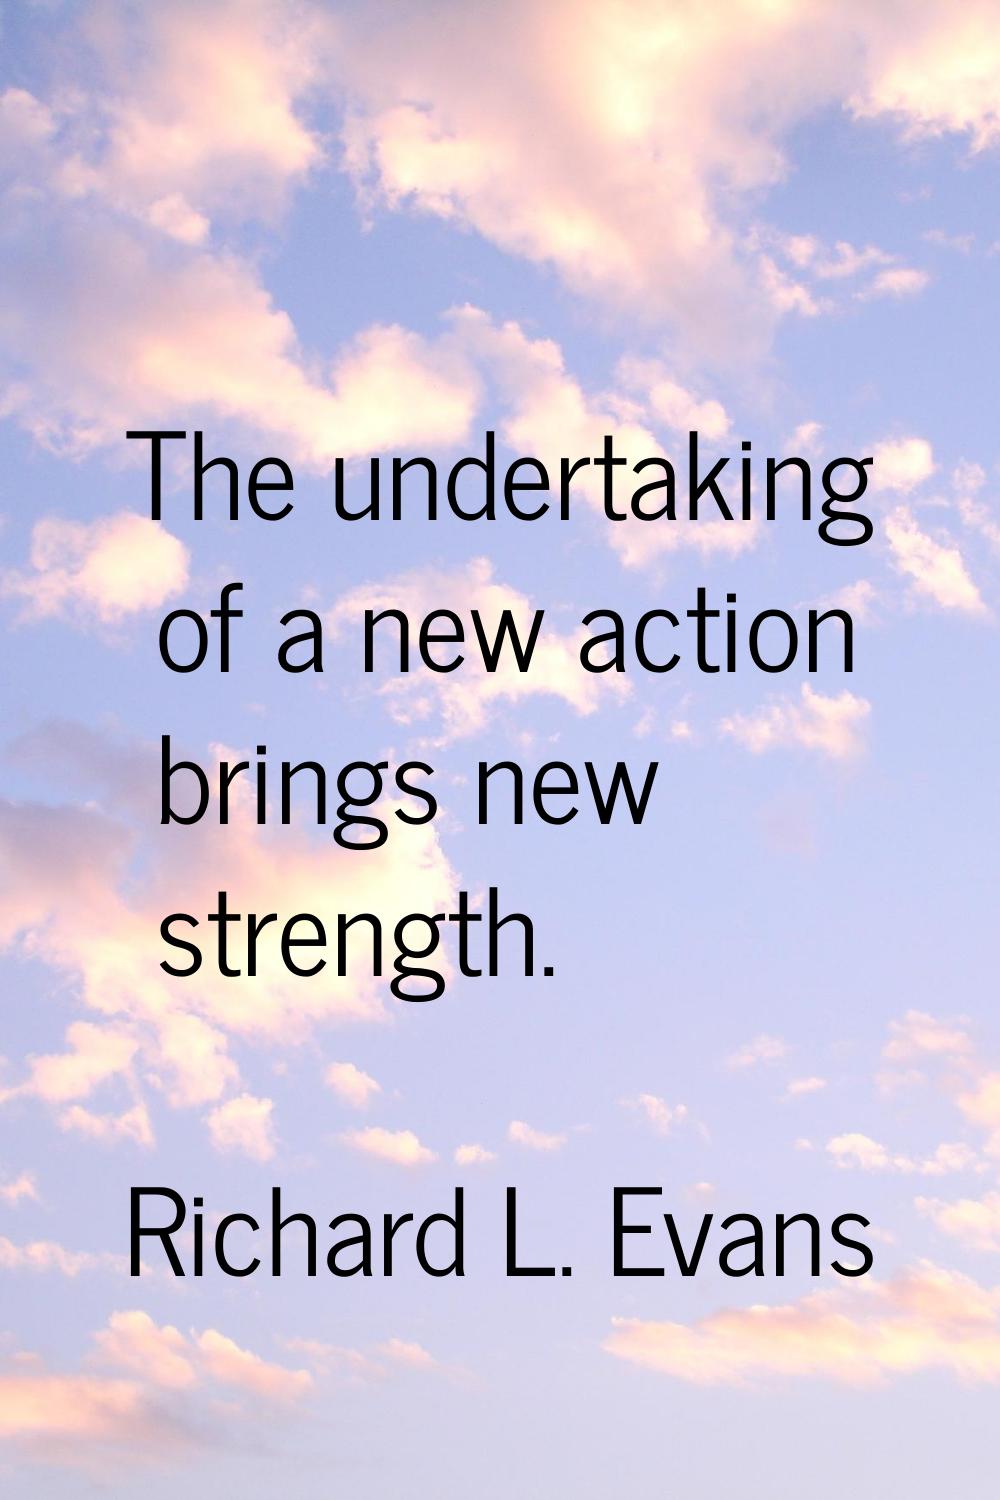 The undertaking of a new action brings new strength.